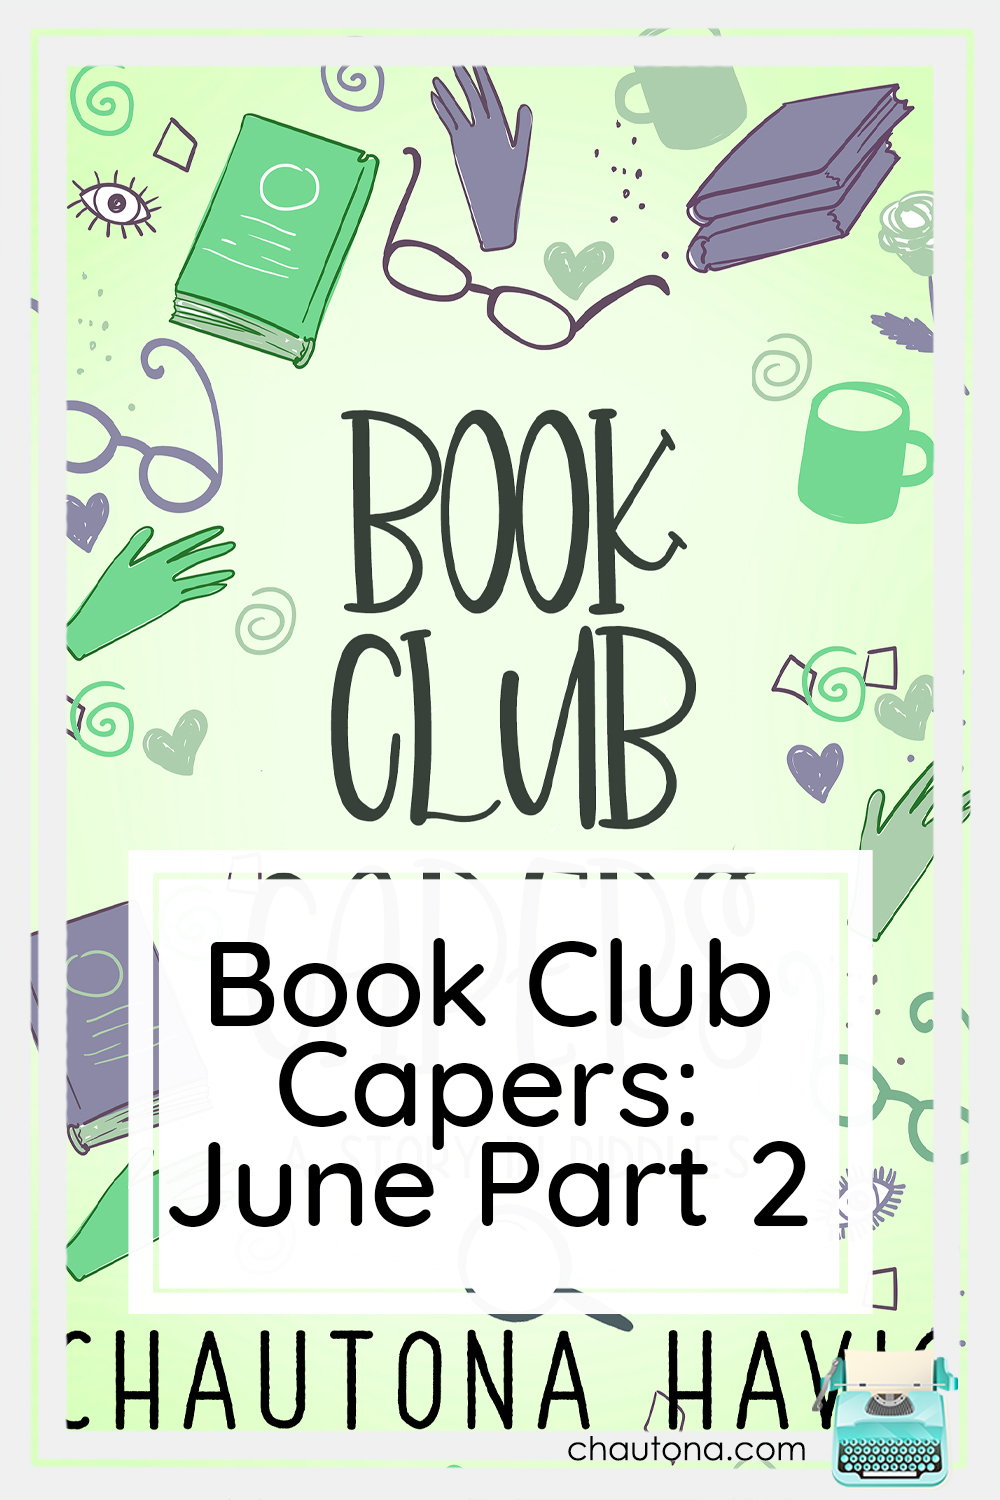 The Book Club Capers June second part is up. See what book you guys chose and what's going on with the case. Who's responsible for this nonsense? via @chautonahavig